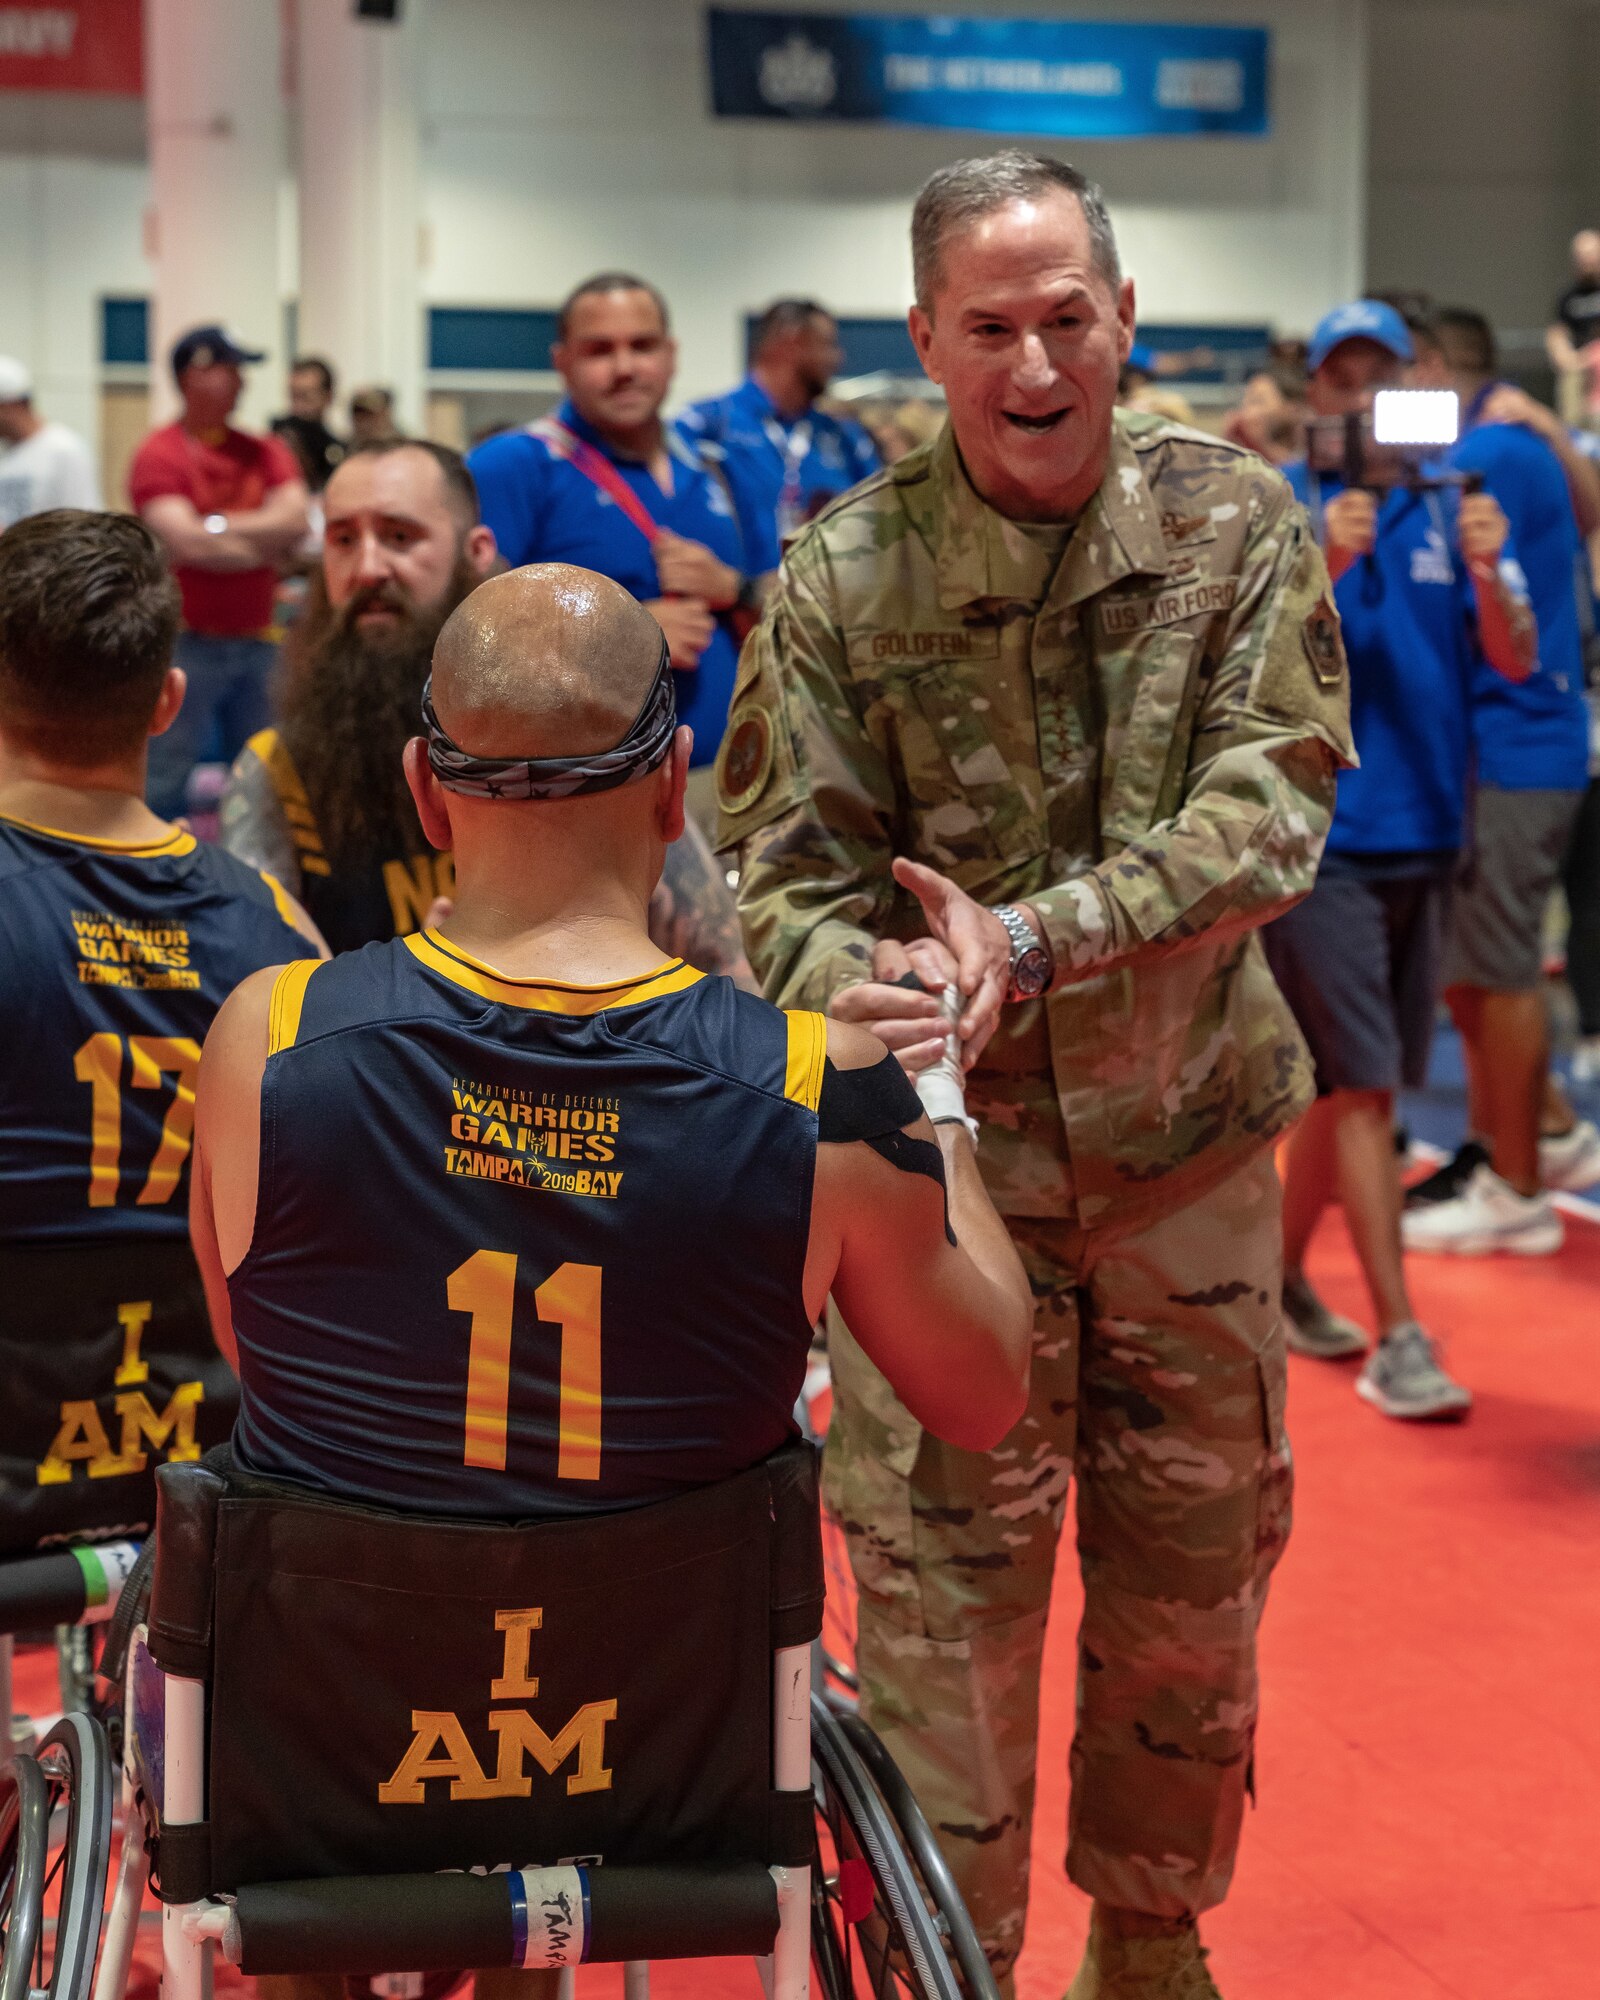 Air Force Chief of Staff Gen. David L. Goldfein congratulates Hospital Corpsman 1st Class Carlos Valerio, a Team Navy athlete, for a well-played game after Team Air Force defeated Team Navy 66-60 in wheelchair basketball at the 2019 Department of Defense Warrior Games at Tampa, Fla, June 28, 2019. The Warrior Games showcase the resilient spirit of today’s service members across all branches of the military. (U.S. Air Force photo by Tech Sgt. Lionel Castellano)